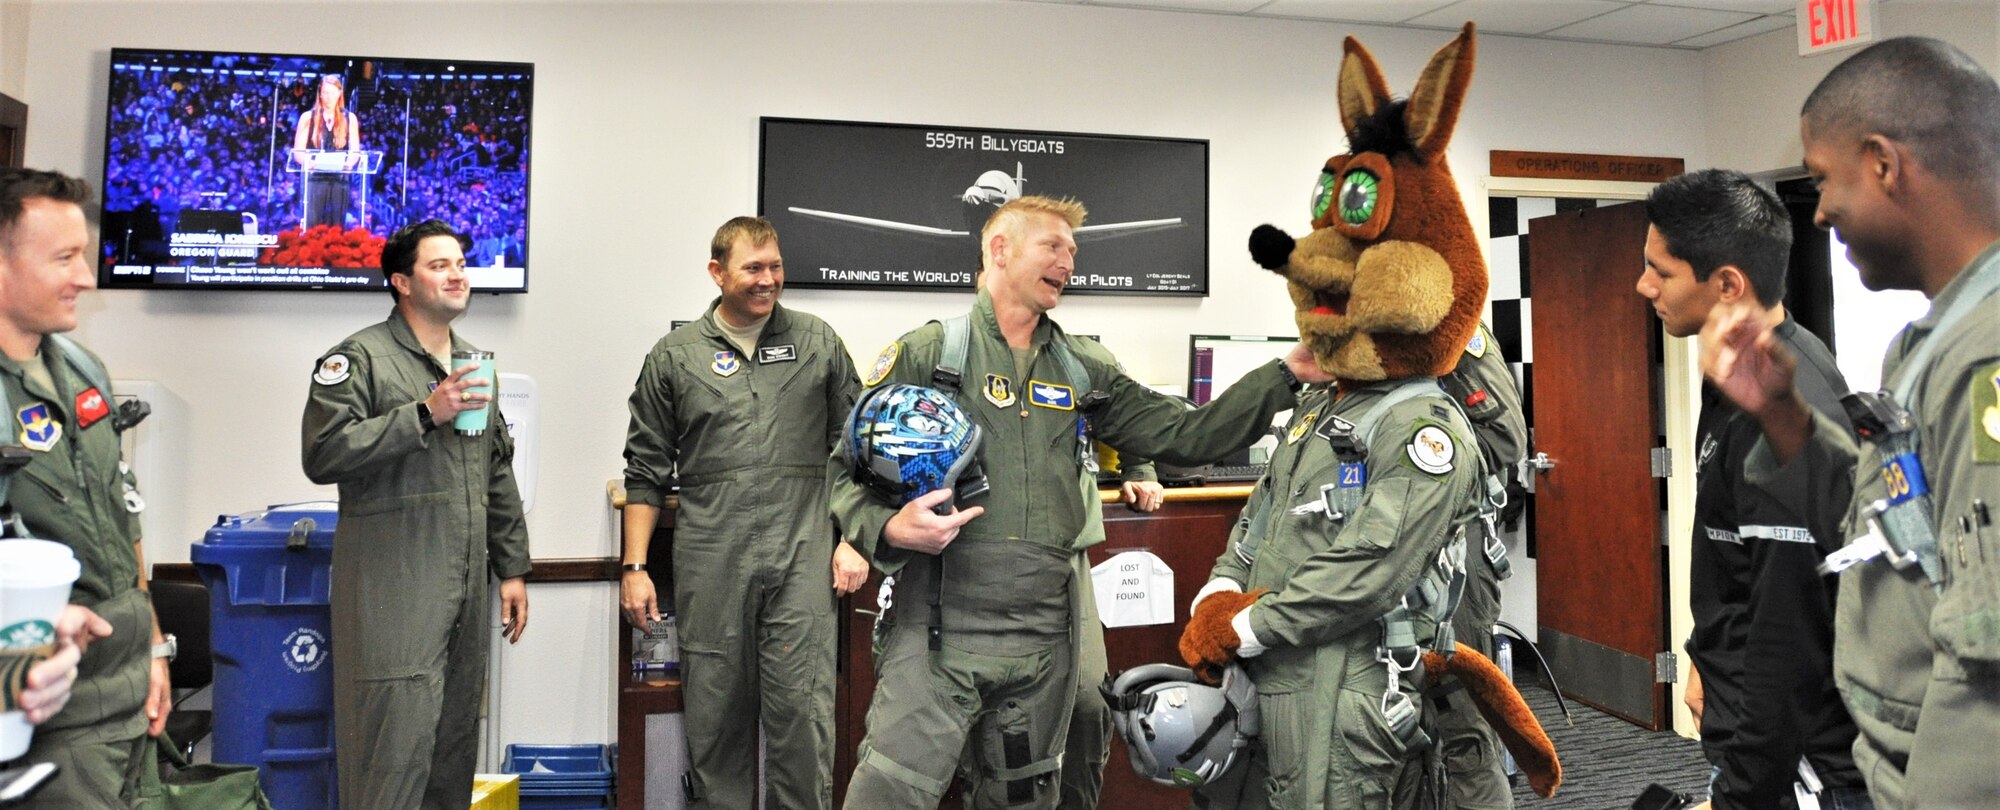 340th Flying Training Group instructor pilot – Lt. Col. Mark Pasierb (center) chats with the Spurs Coyote in the 559th Training Squadron step room February 25 following the Coyote’s simulated flight at Joint Base San Antonio-Randolph, Texas where Regular Air Force, Air Force Reserve, and civilian Airmen from the 340th Flying Training Group headquarters, 39th Flying Training Squadron T-6 Texan Flight, 12th Flying Training Wing Safety, 559th Flying Training Squadron T-6 team, and 3rd Combat Camera Squadron (JBSA-Lackland) members, and the NBA San Antonio Spurs production crew worked to put the Coyote through the pilot training process. Video footage will be used for a Spurs Military Appreciation video to be shown during the March 10 game. (U.S. Air Force photo by Janis El Shabazz)